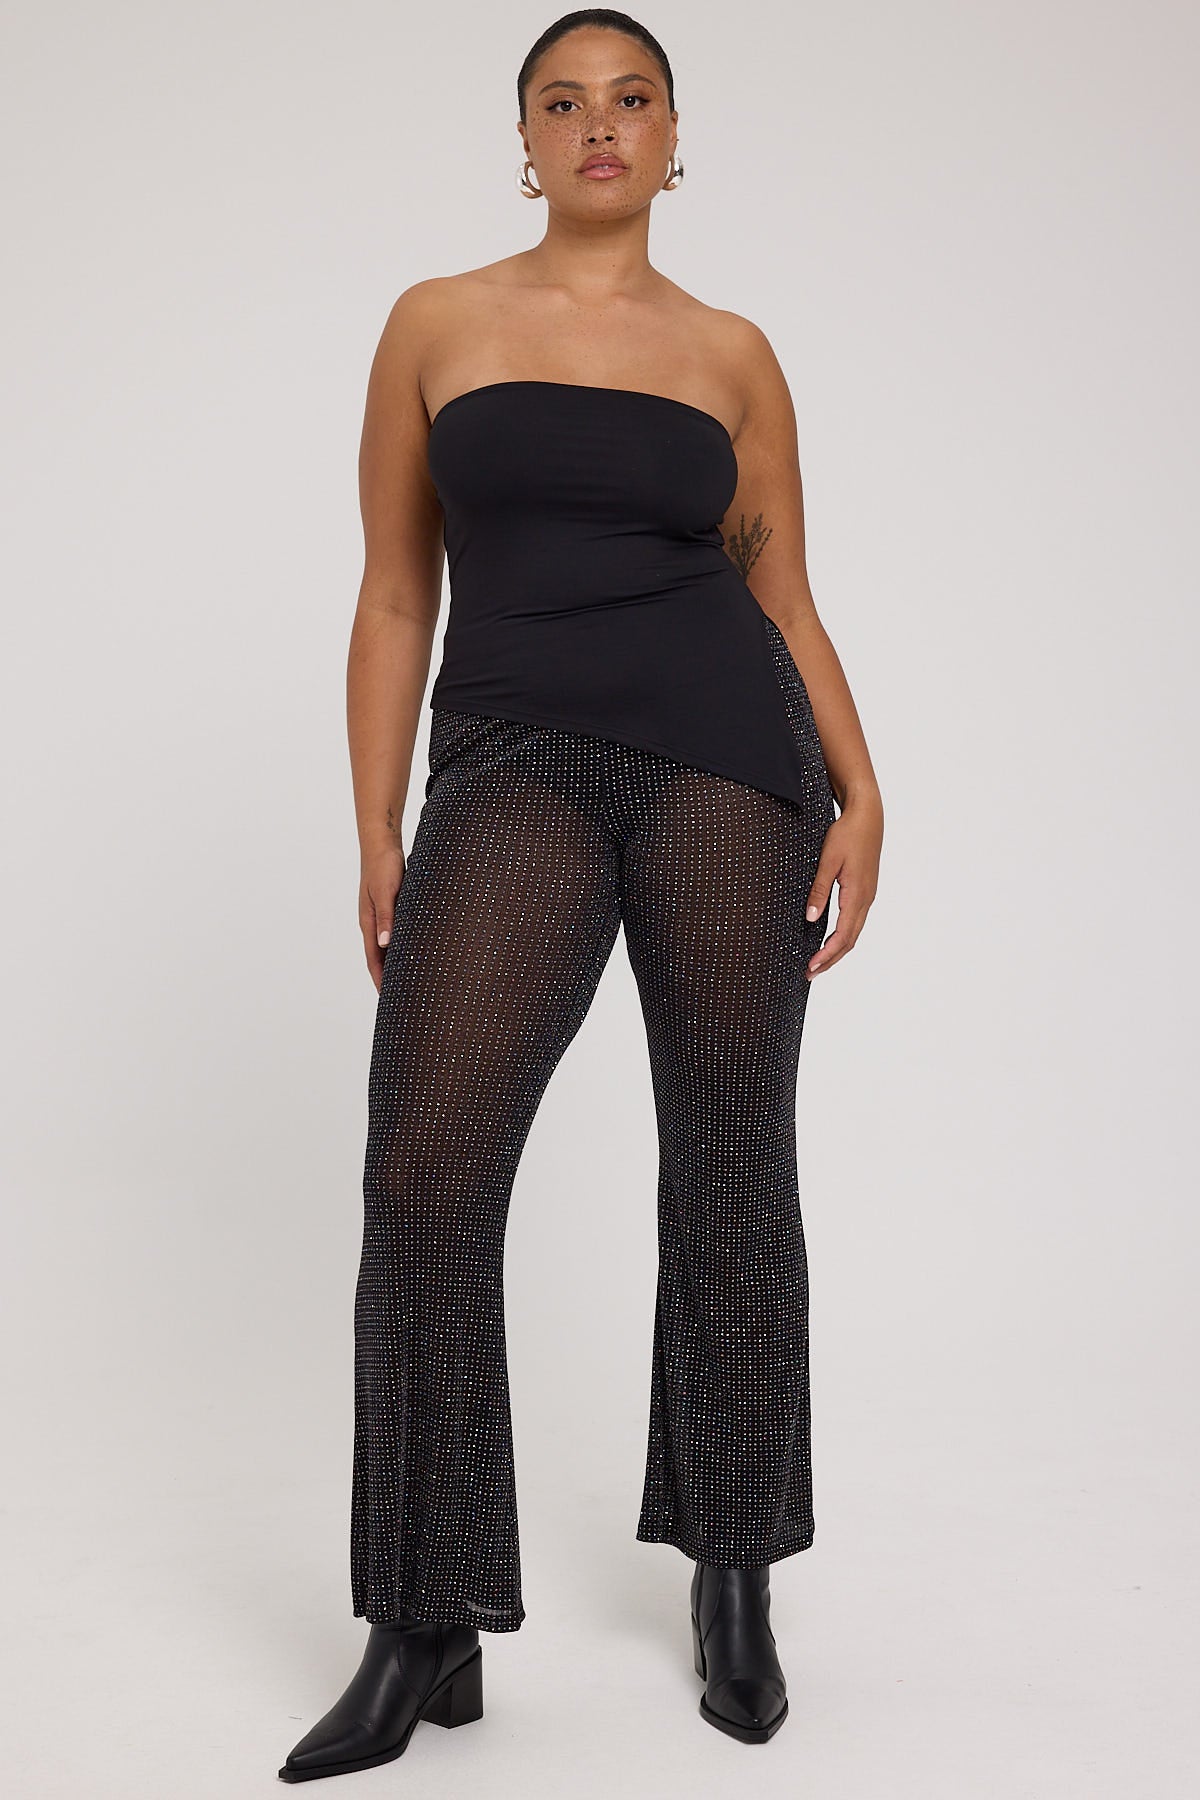 Luck & Trouble Flashy Glitter Flares Black